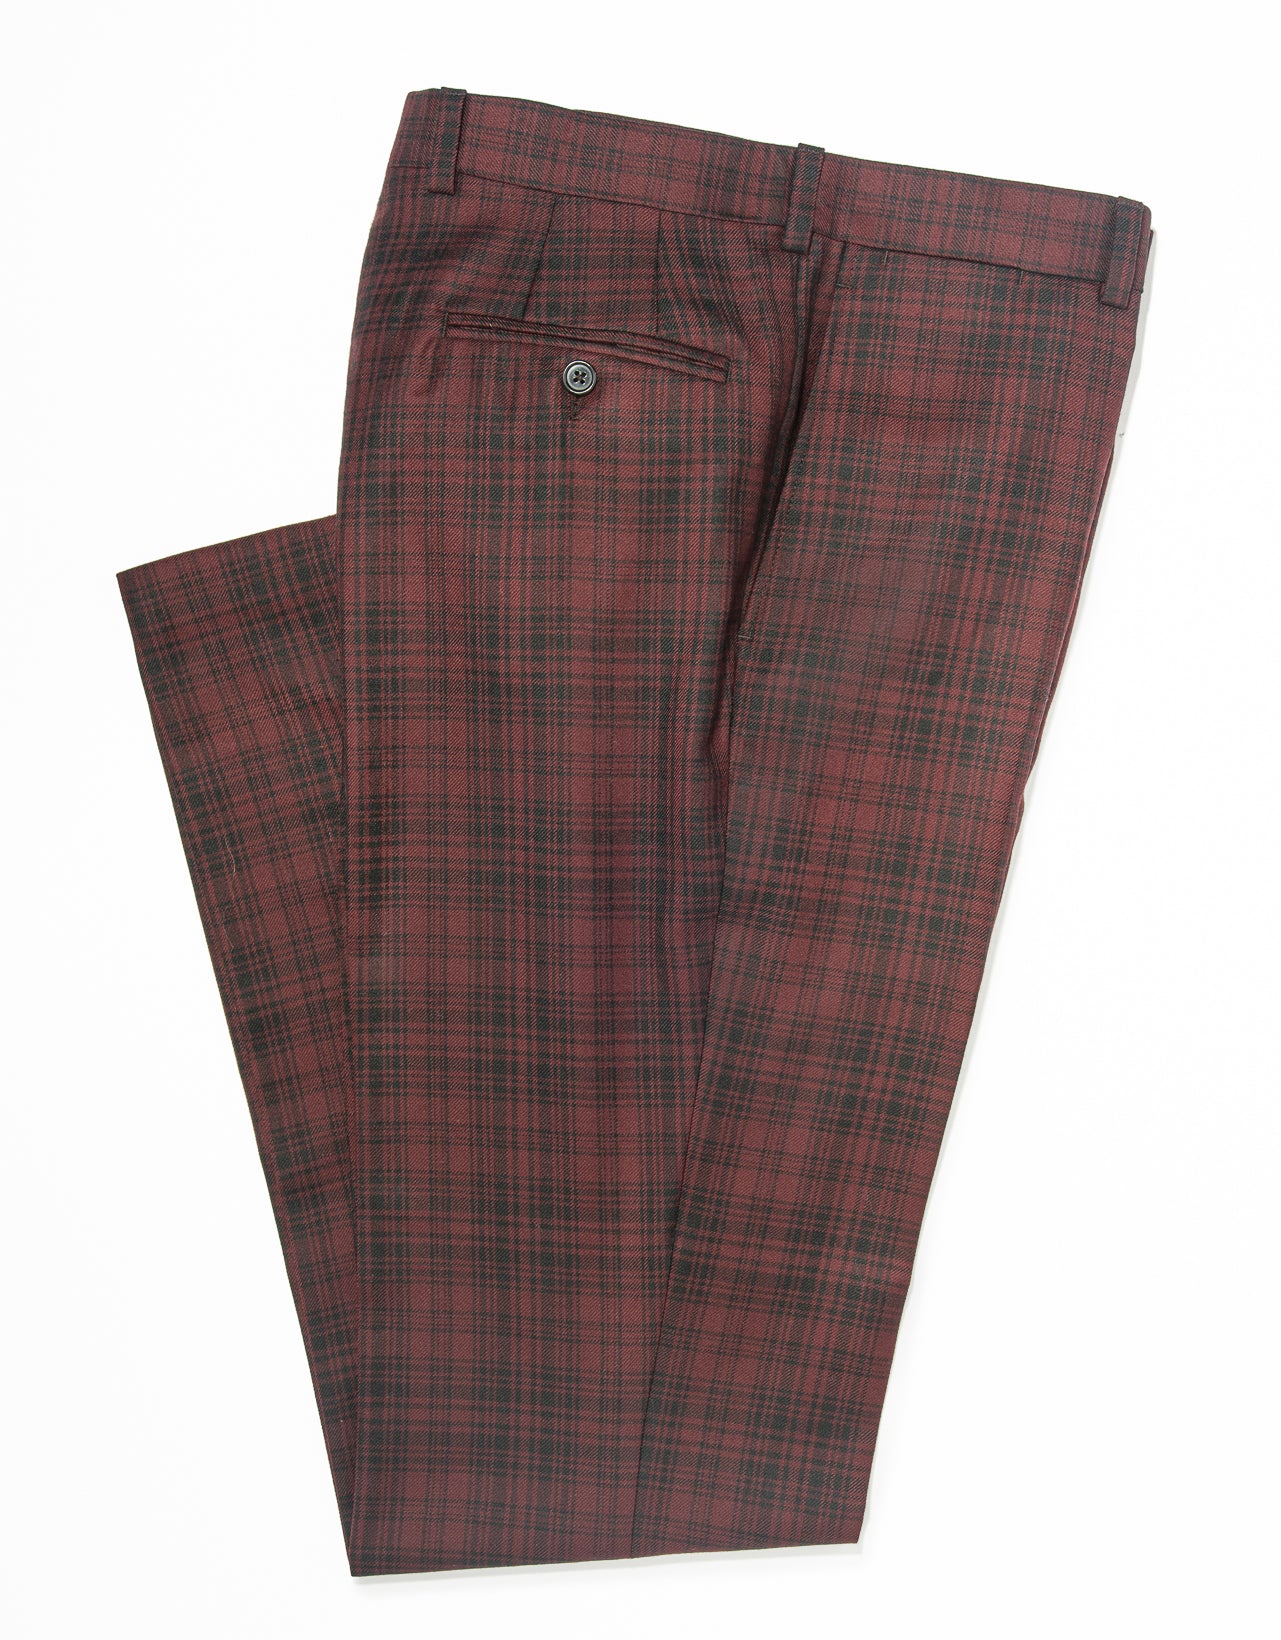 RED/BLACK PLAID TROUSERS - CLASSIC FIT